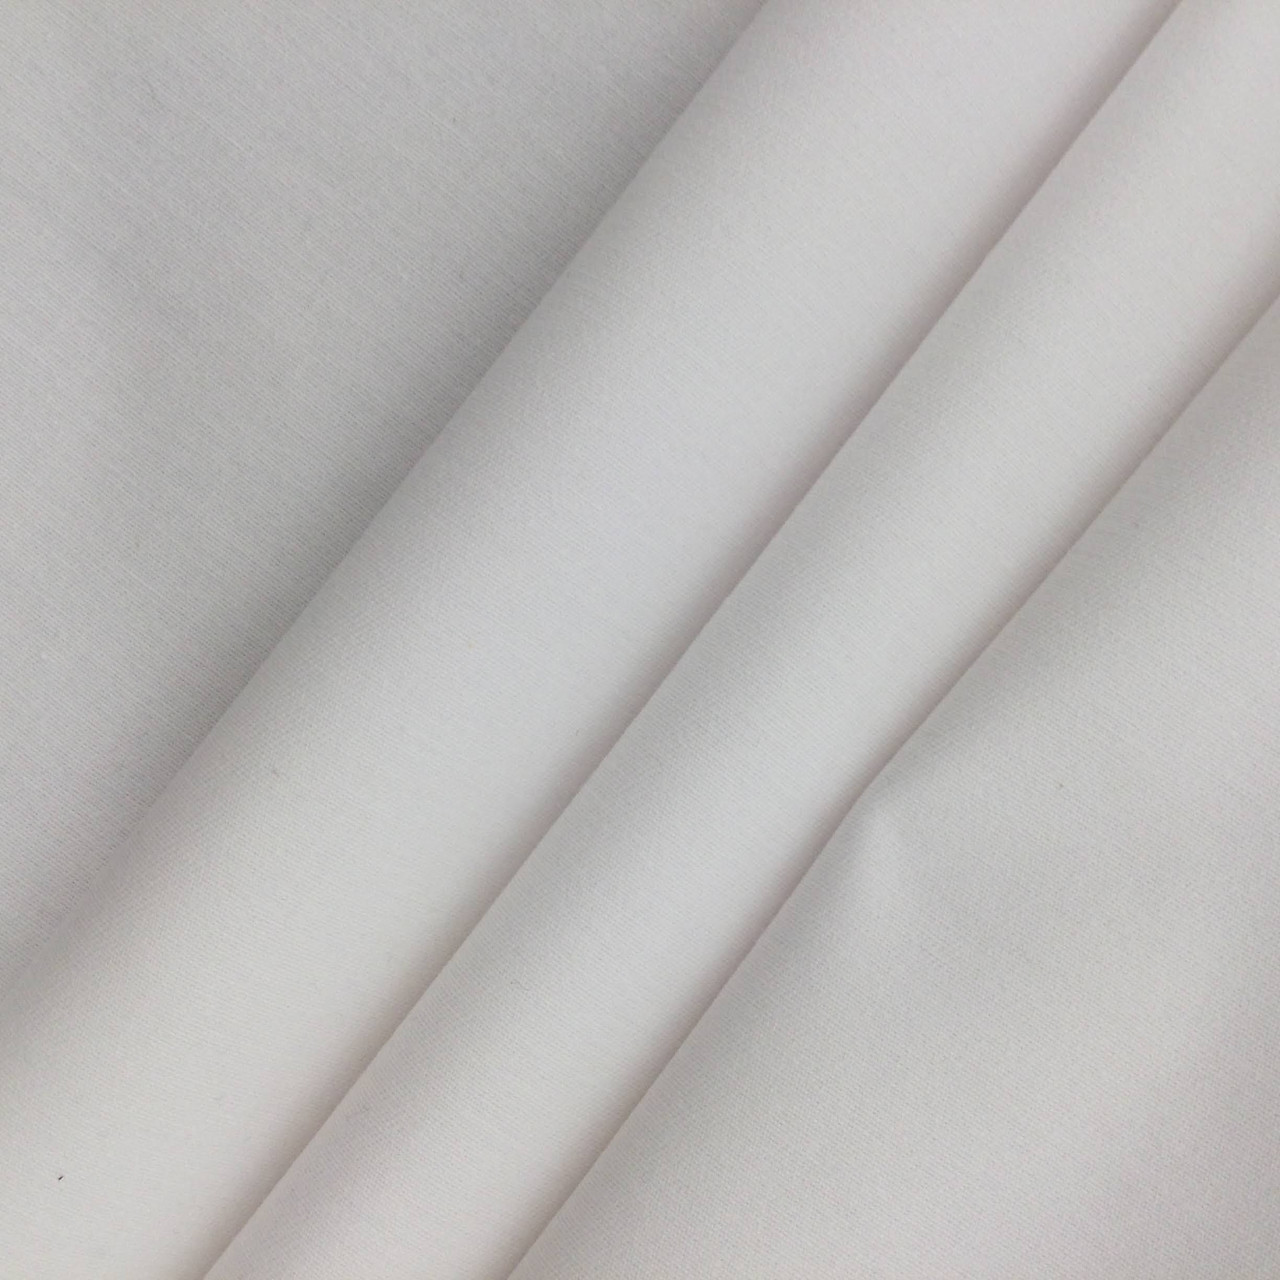 Twill Fabric With Your Design. Customise Your Cotton Twill Fabric